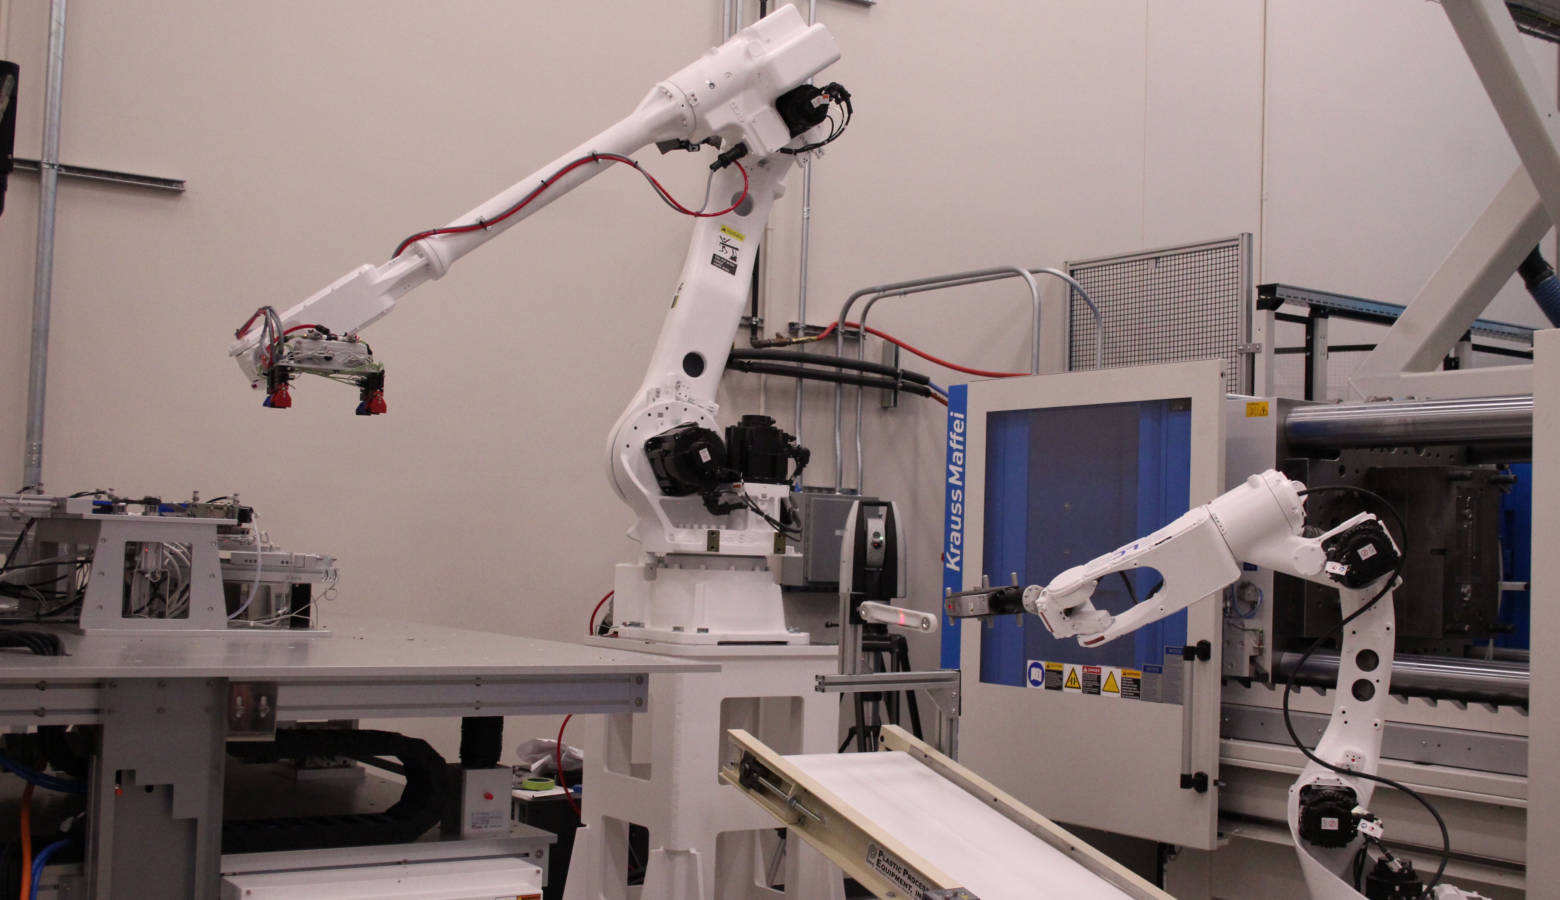 Inside Purdue University's new Manufacturing Design Laboratory, robots fabricate pieces, then hand them off to one another for testing – all without humans touching the parts. (Samantha Horton/IPB News)